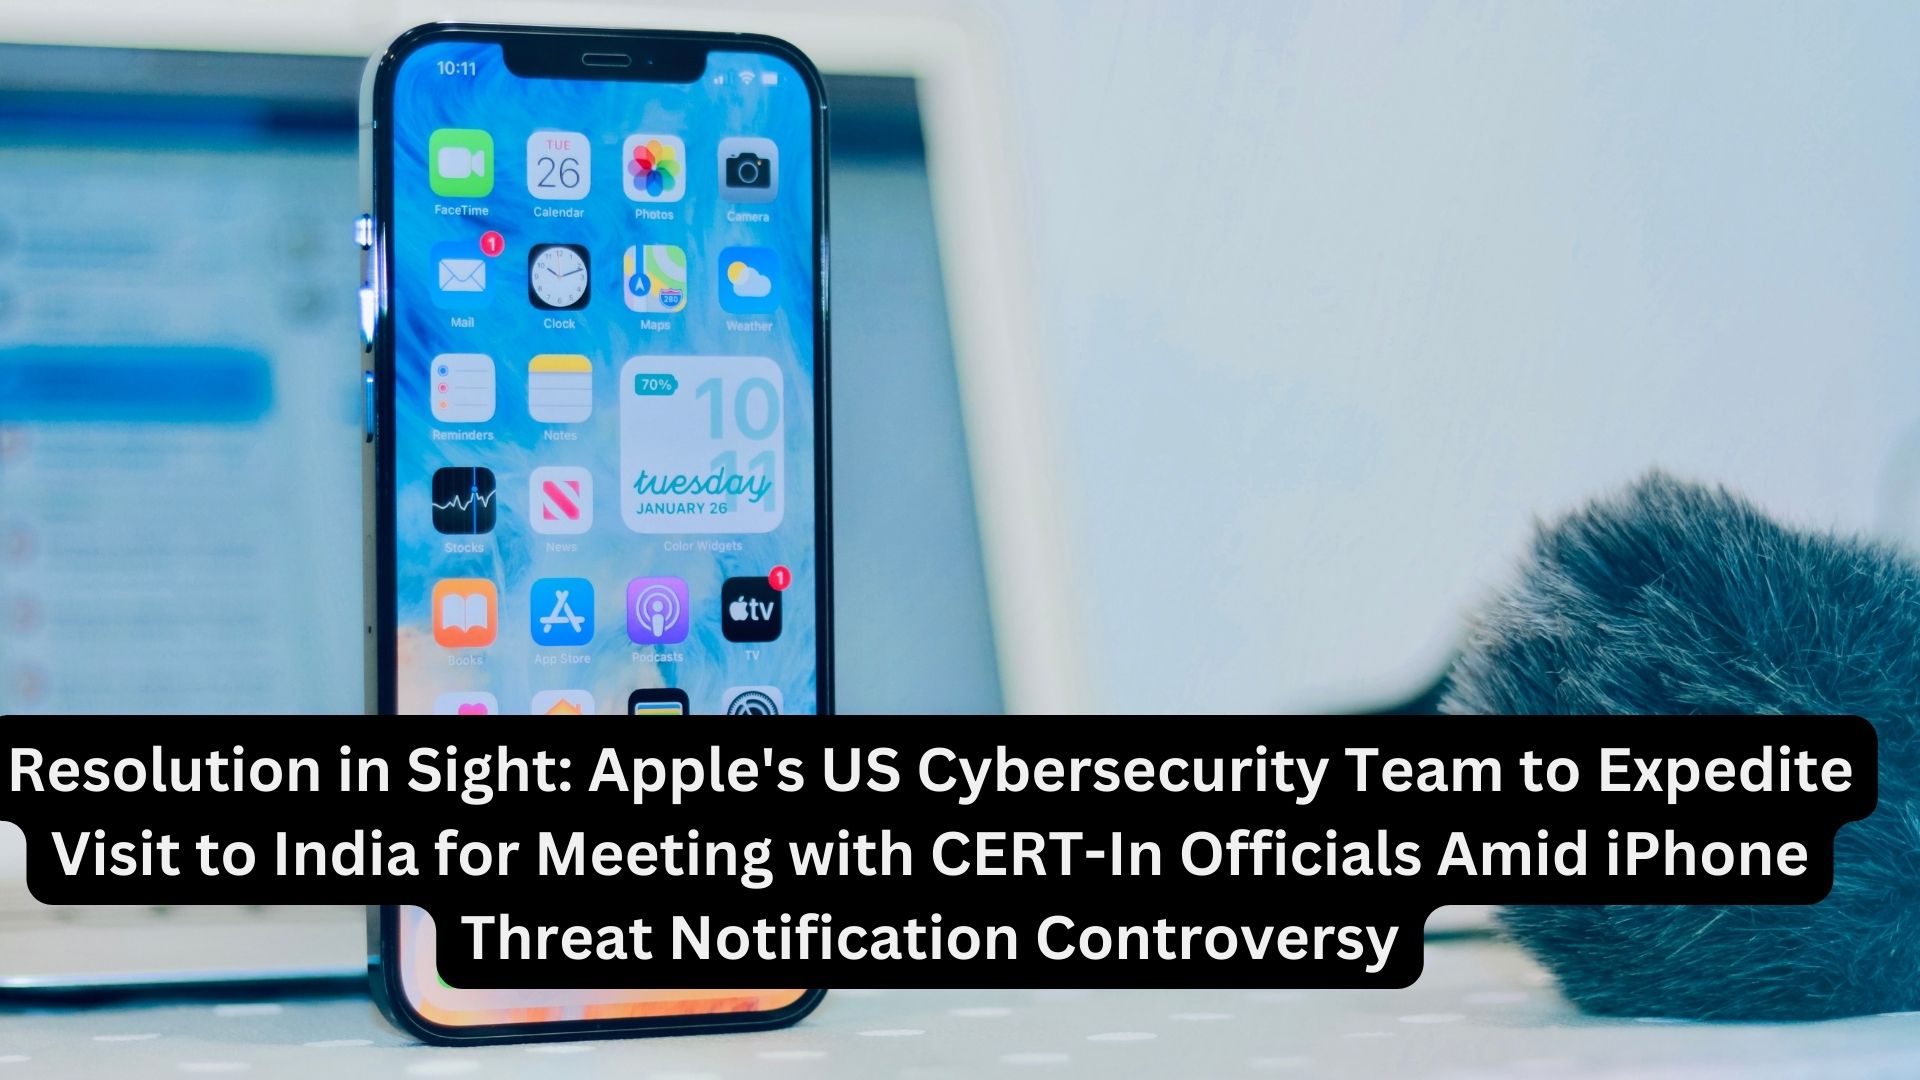 Resolution in Sight: Apple's US Cybersecurity Team to Expedite Visit to India for Meeting with CERT-In Officials Amid iPhone Threat Notification Controversy